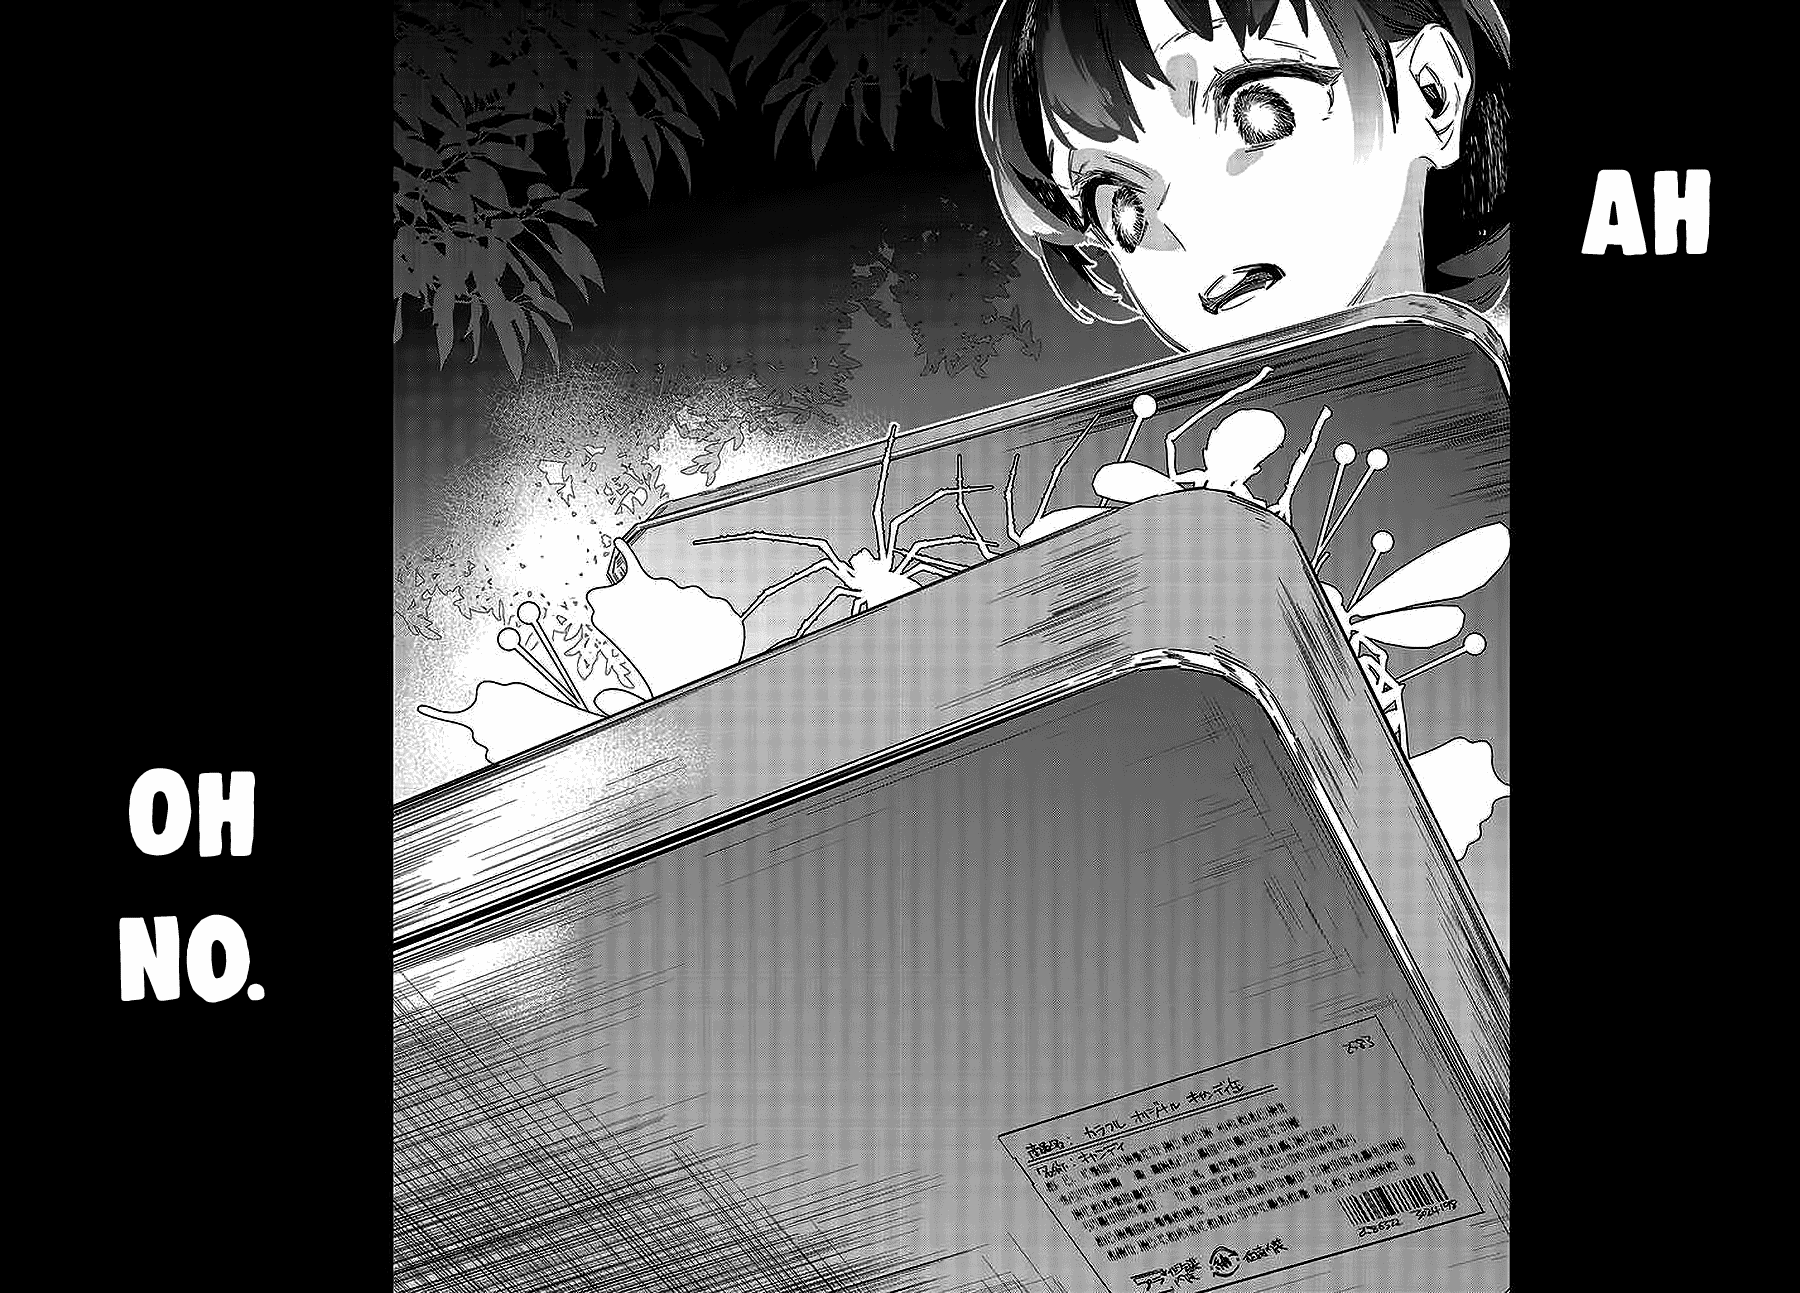 I Reincarnated As The Little Sister Of A Death Game Manga's Murder Mastermind And Failed Chapter 1 #36